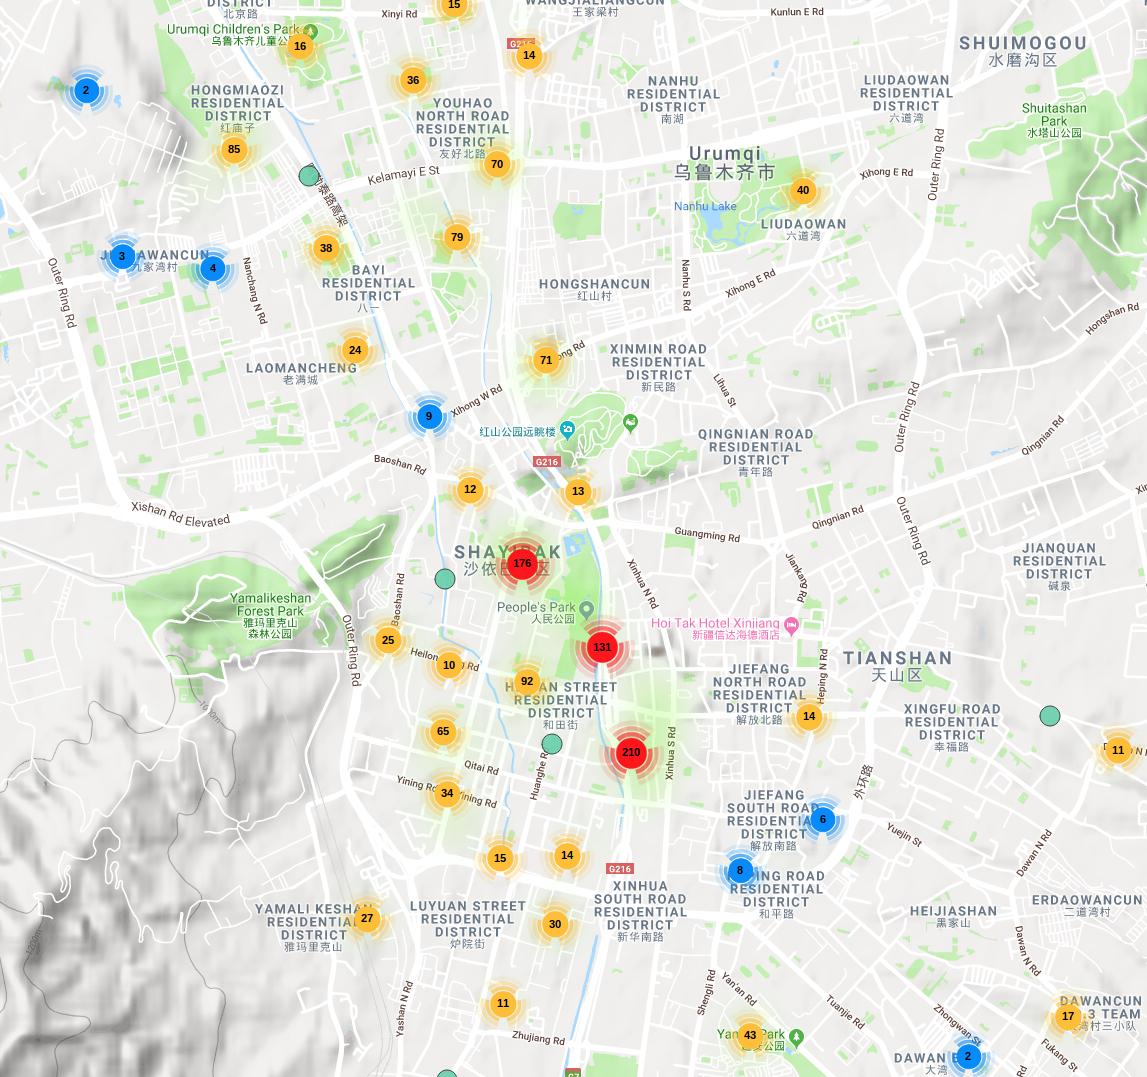 These are the trackers which are connected the SenseNets database. They make part of this artificial intelligence-based security network which uses face recognition, crowd analysis, and personal verification.  https://mapmakerapp.com/?map=5c66817e44837776217998d97a95